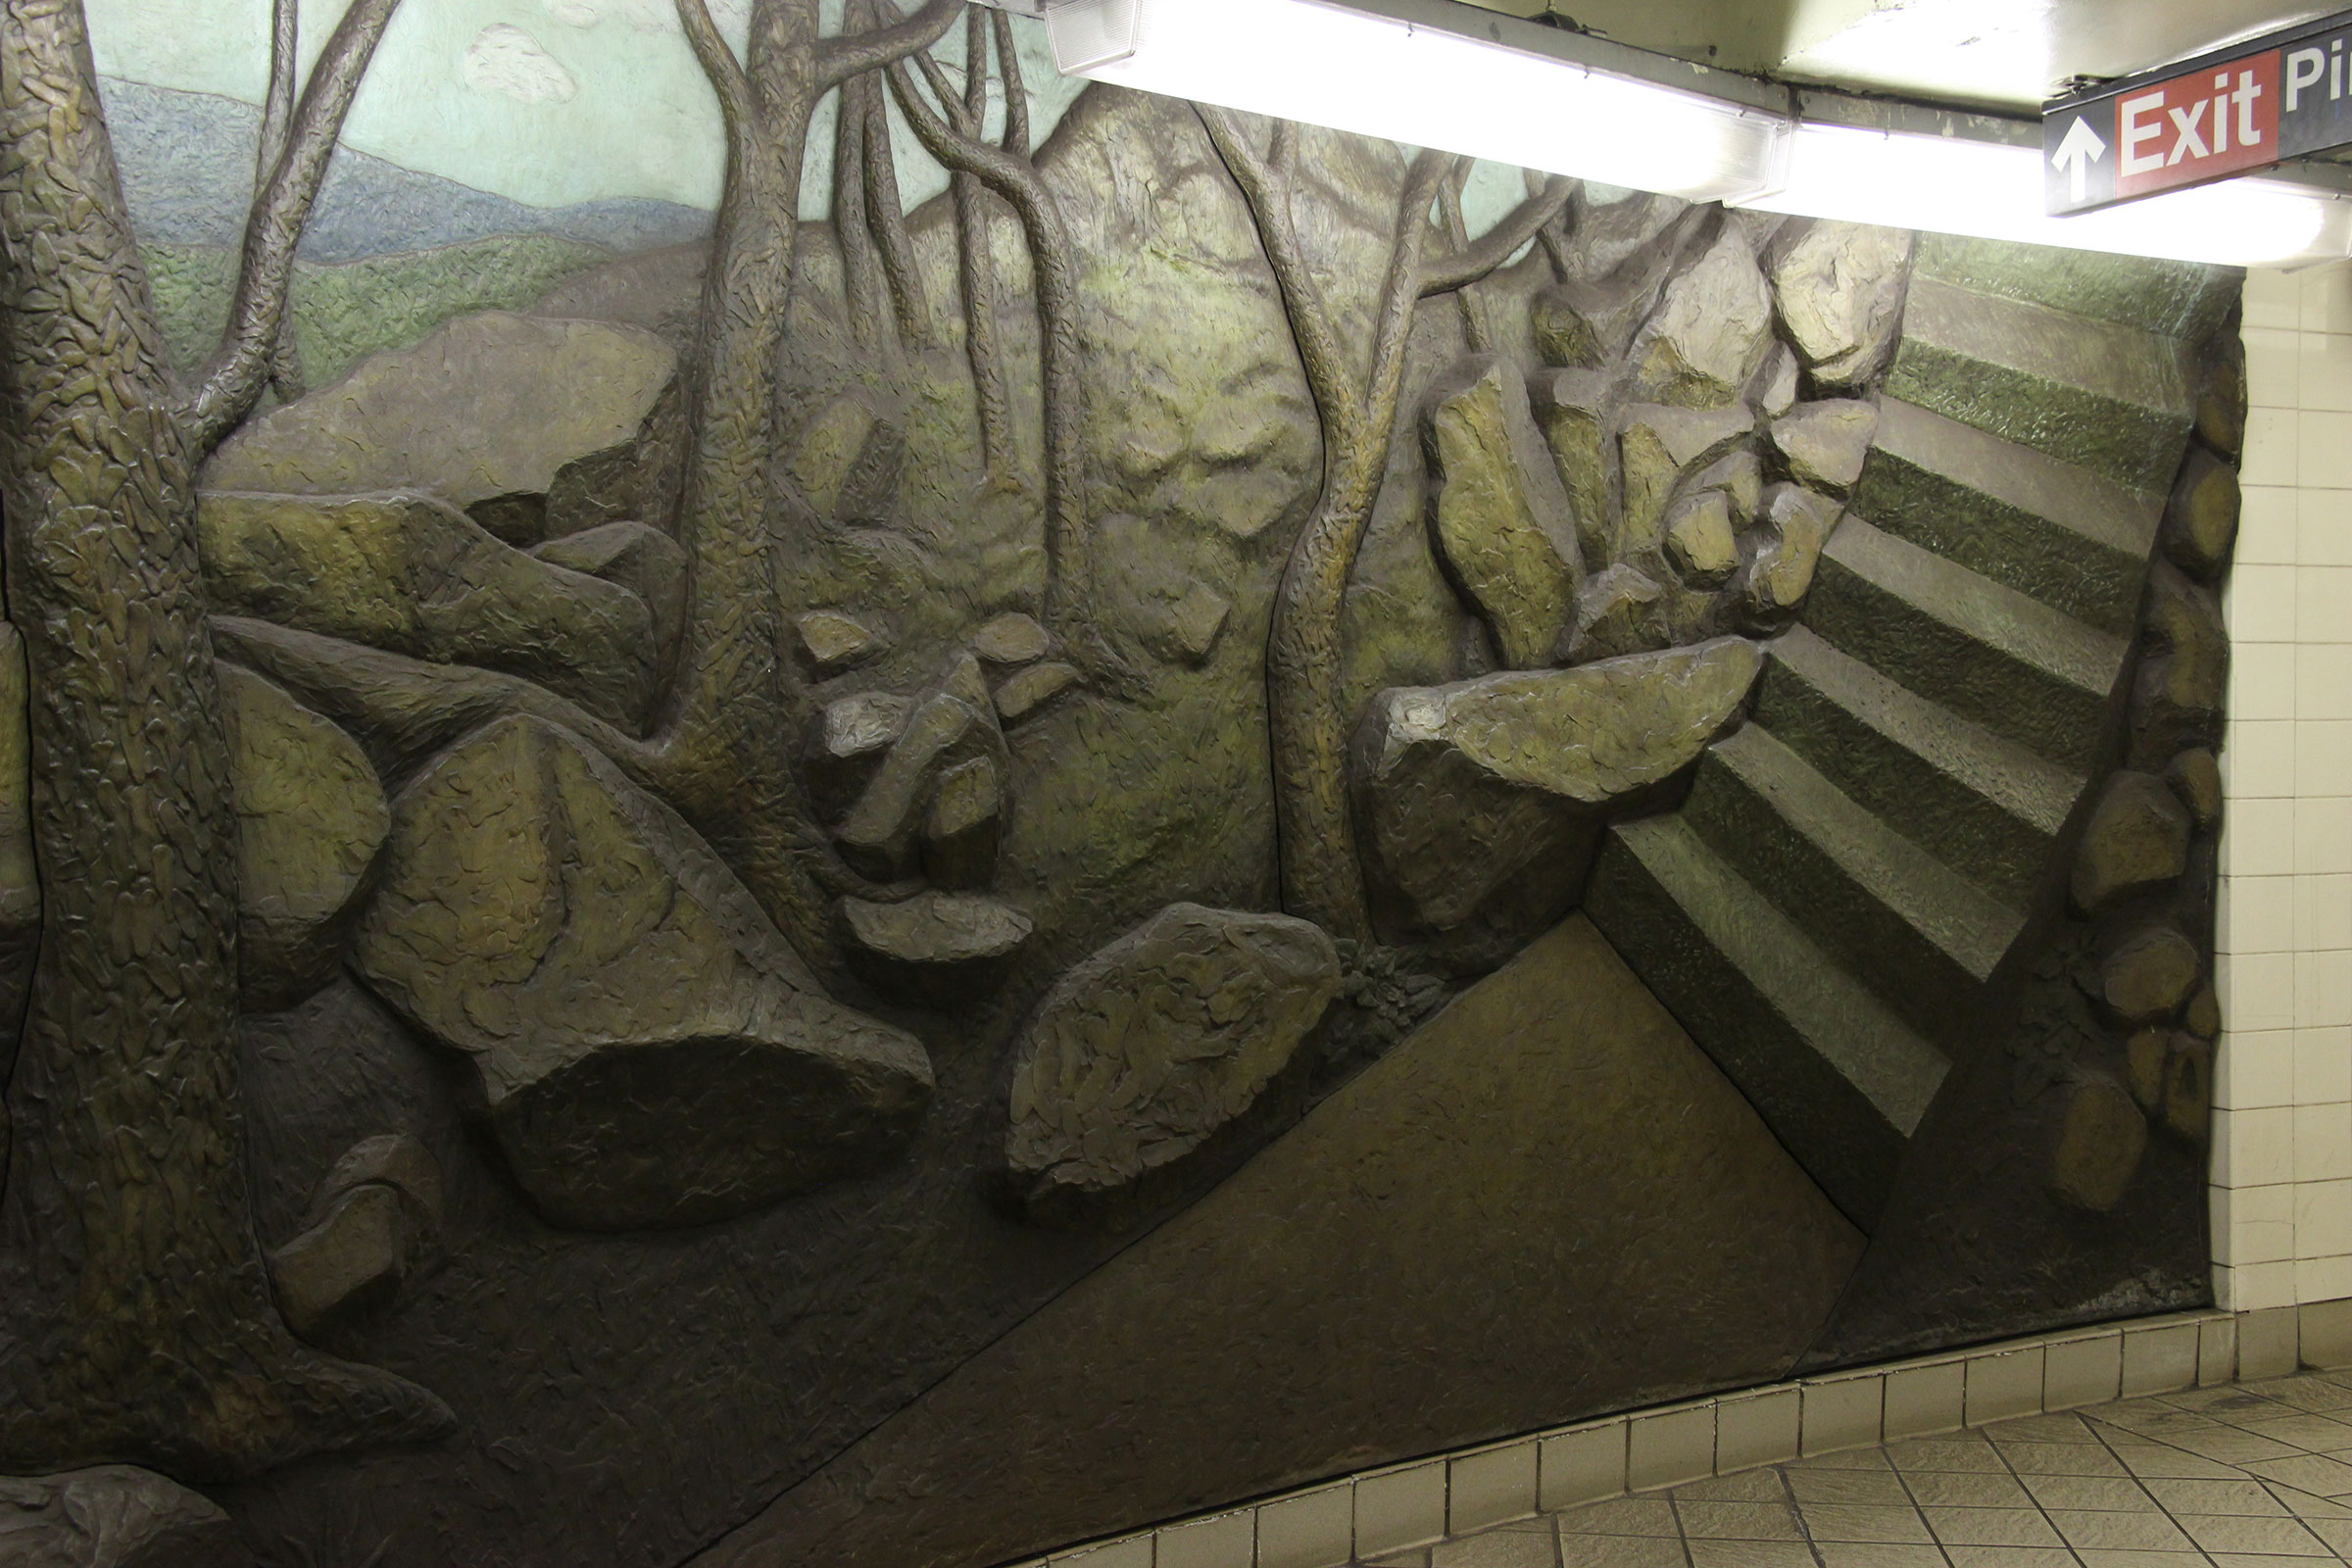 Harry Roseman, BFA Graphic Art ’68, “Subway Wall” (1990) in the Wall Street (2,3) station (photo by ShellyS/Flickr)